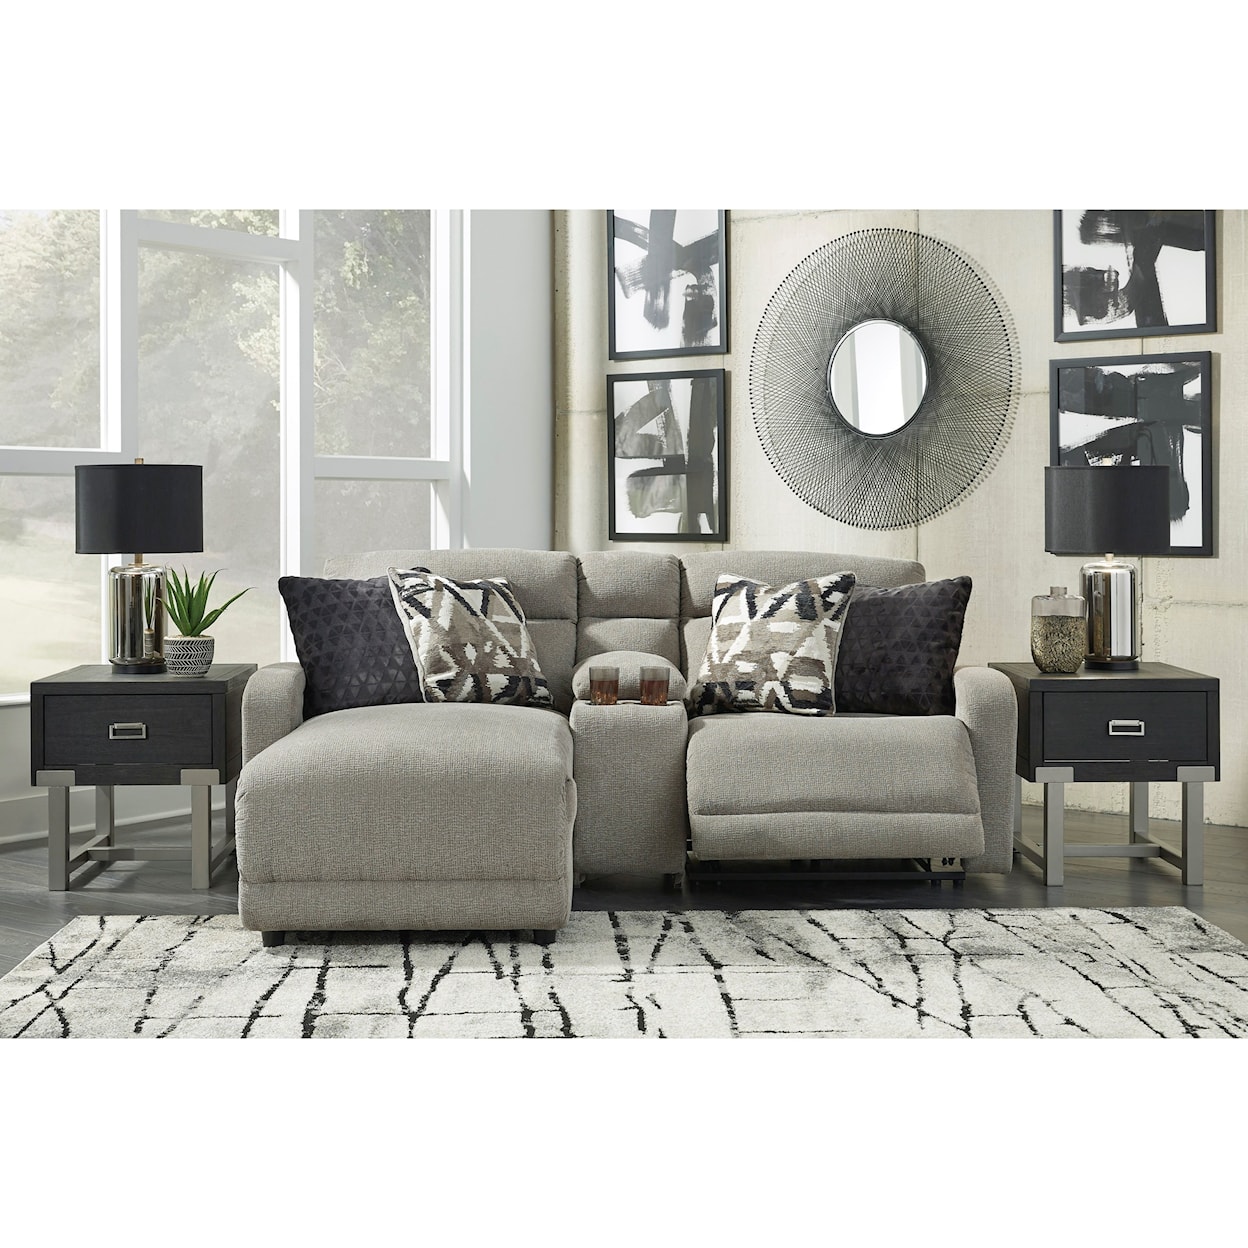 Ashley Furniture Signature Design Colleyville 3-Piece Pwr Reclining Sectional with Chaise